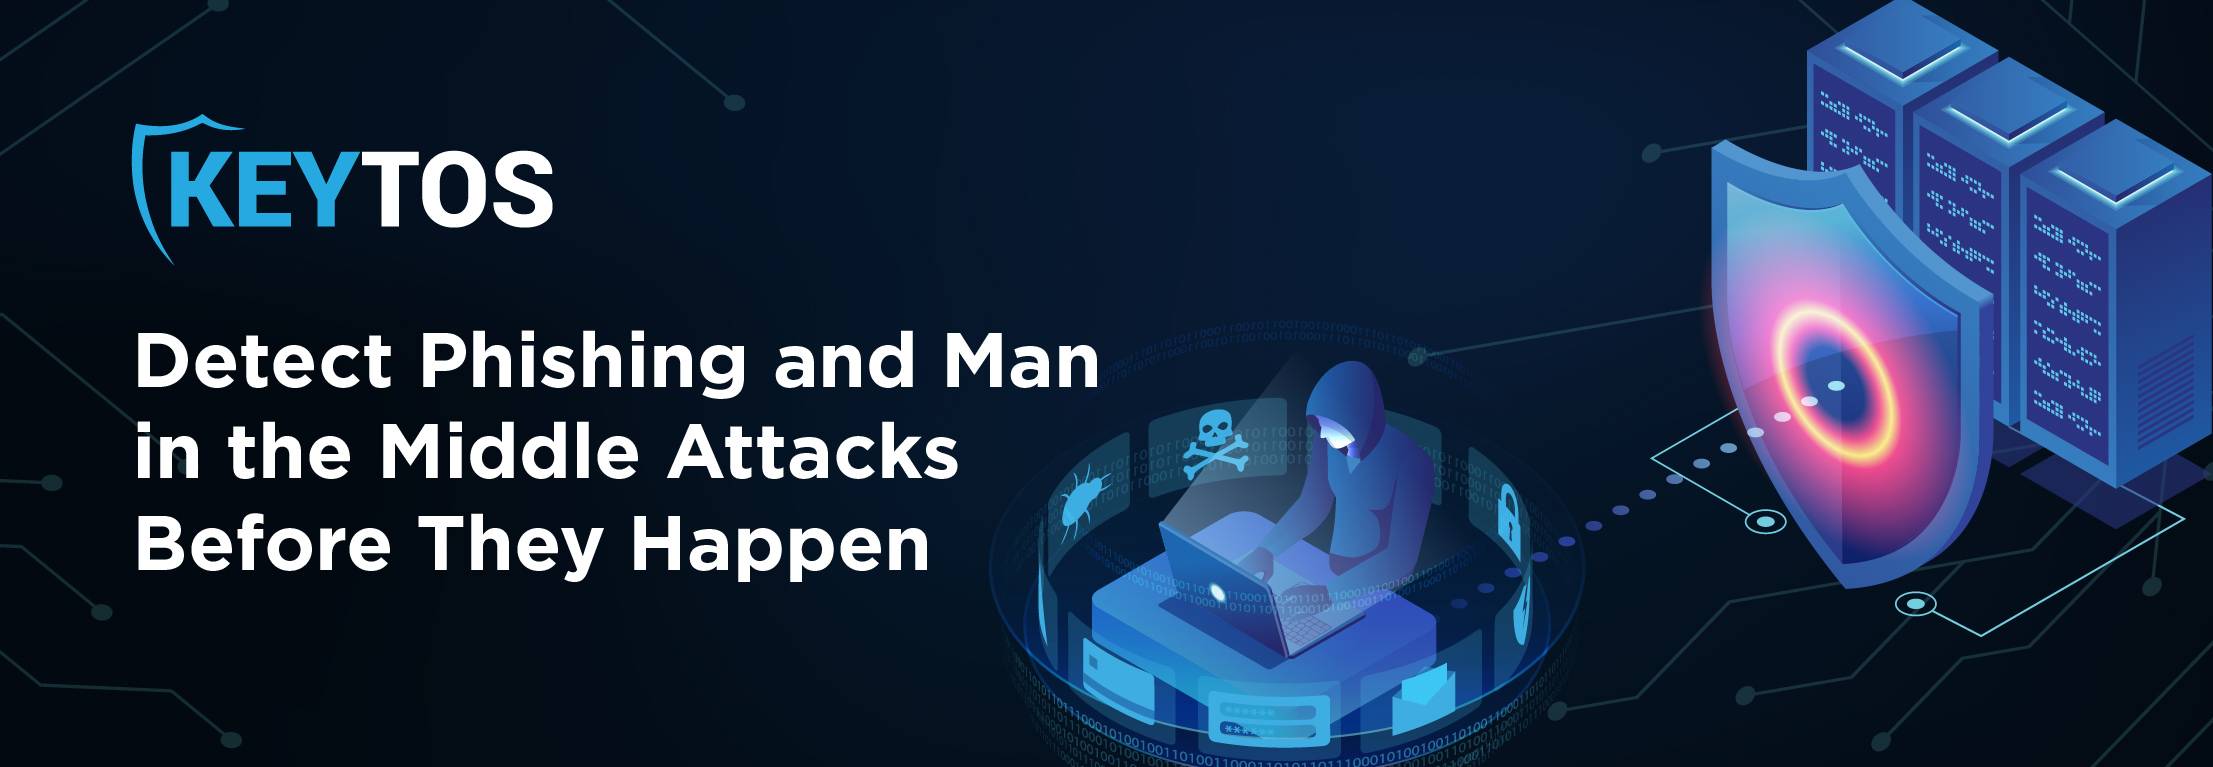 Detect Phishing and Man in the Middle Attacks Before They Happen